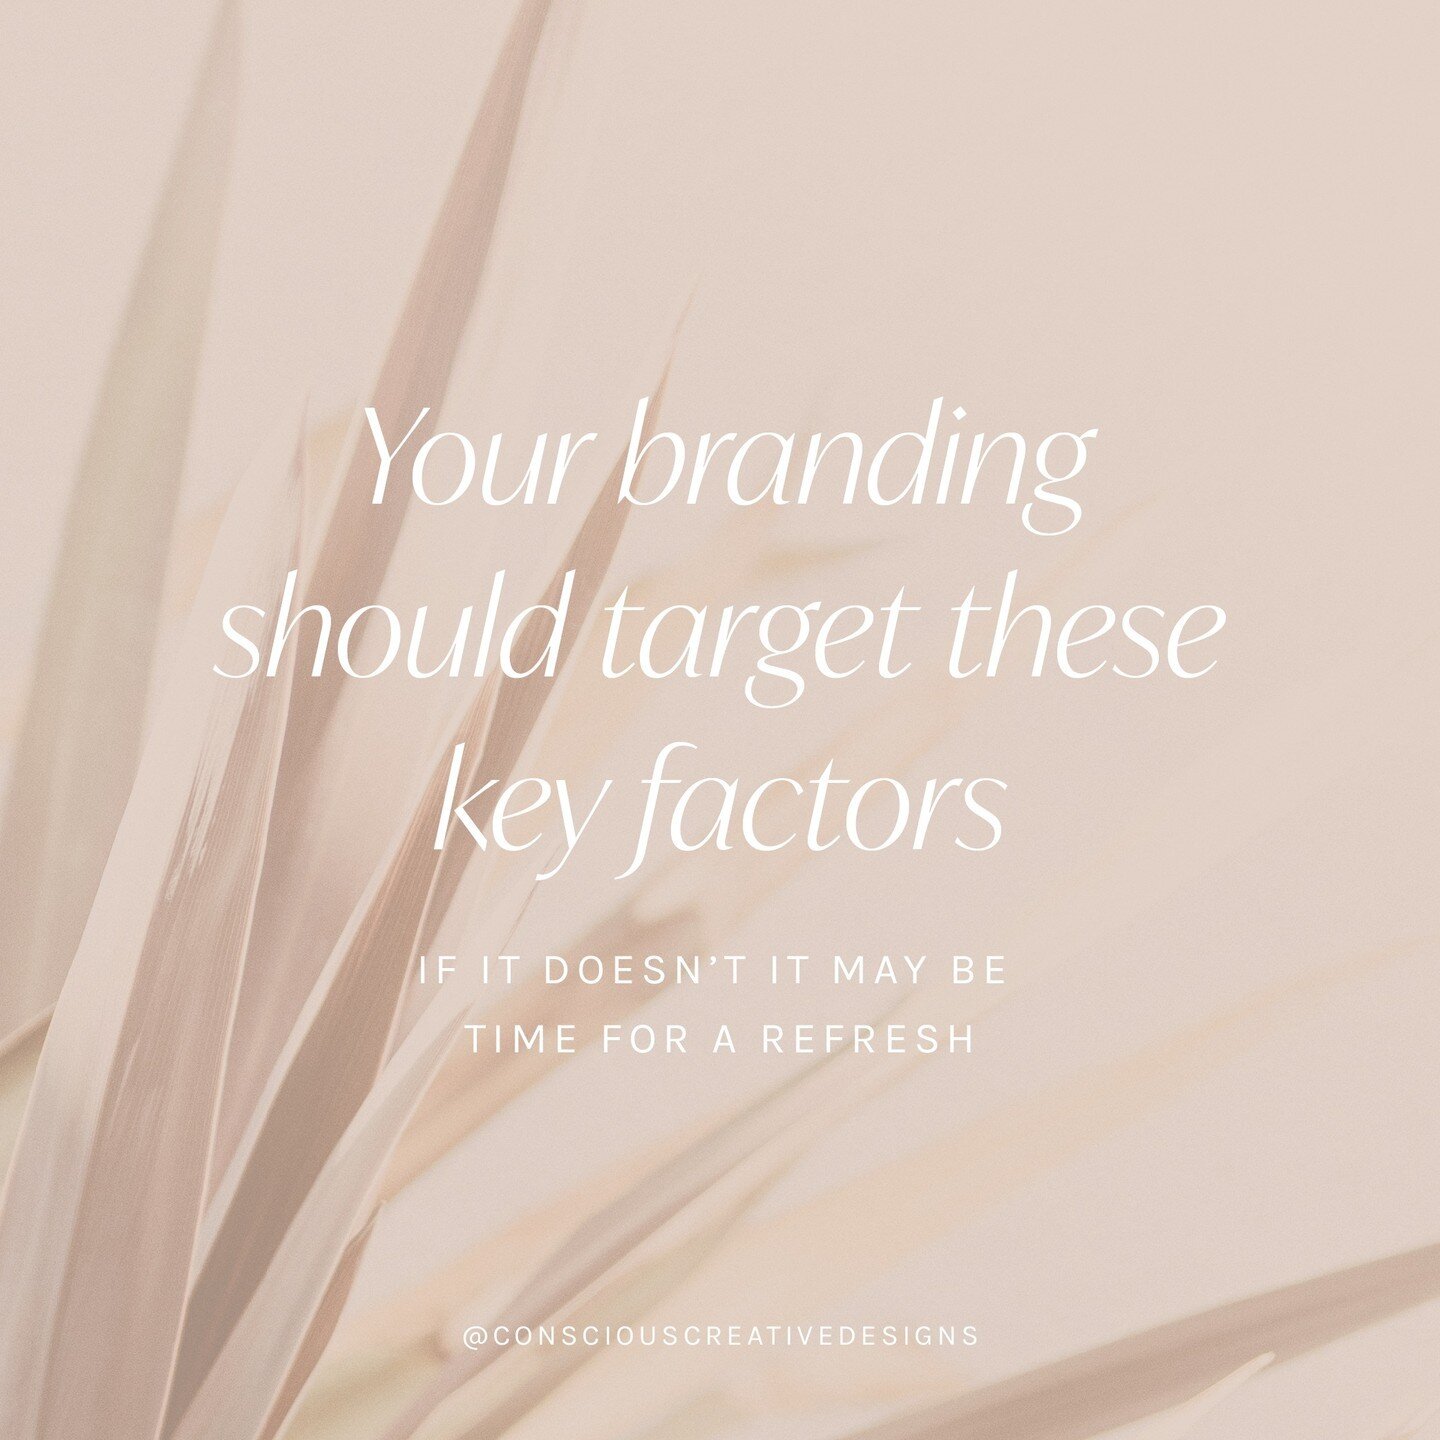 Your branding should target these key factors and if it doesn't it may be time for a refresh ✨
#brandingdesign #consciousbusiness #branddesigner #brandstrategy #heartcenteredbusiness #brandidentity #logodesign #buildyourbrand #brandingstudio